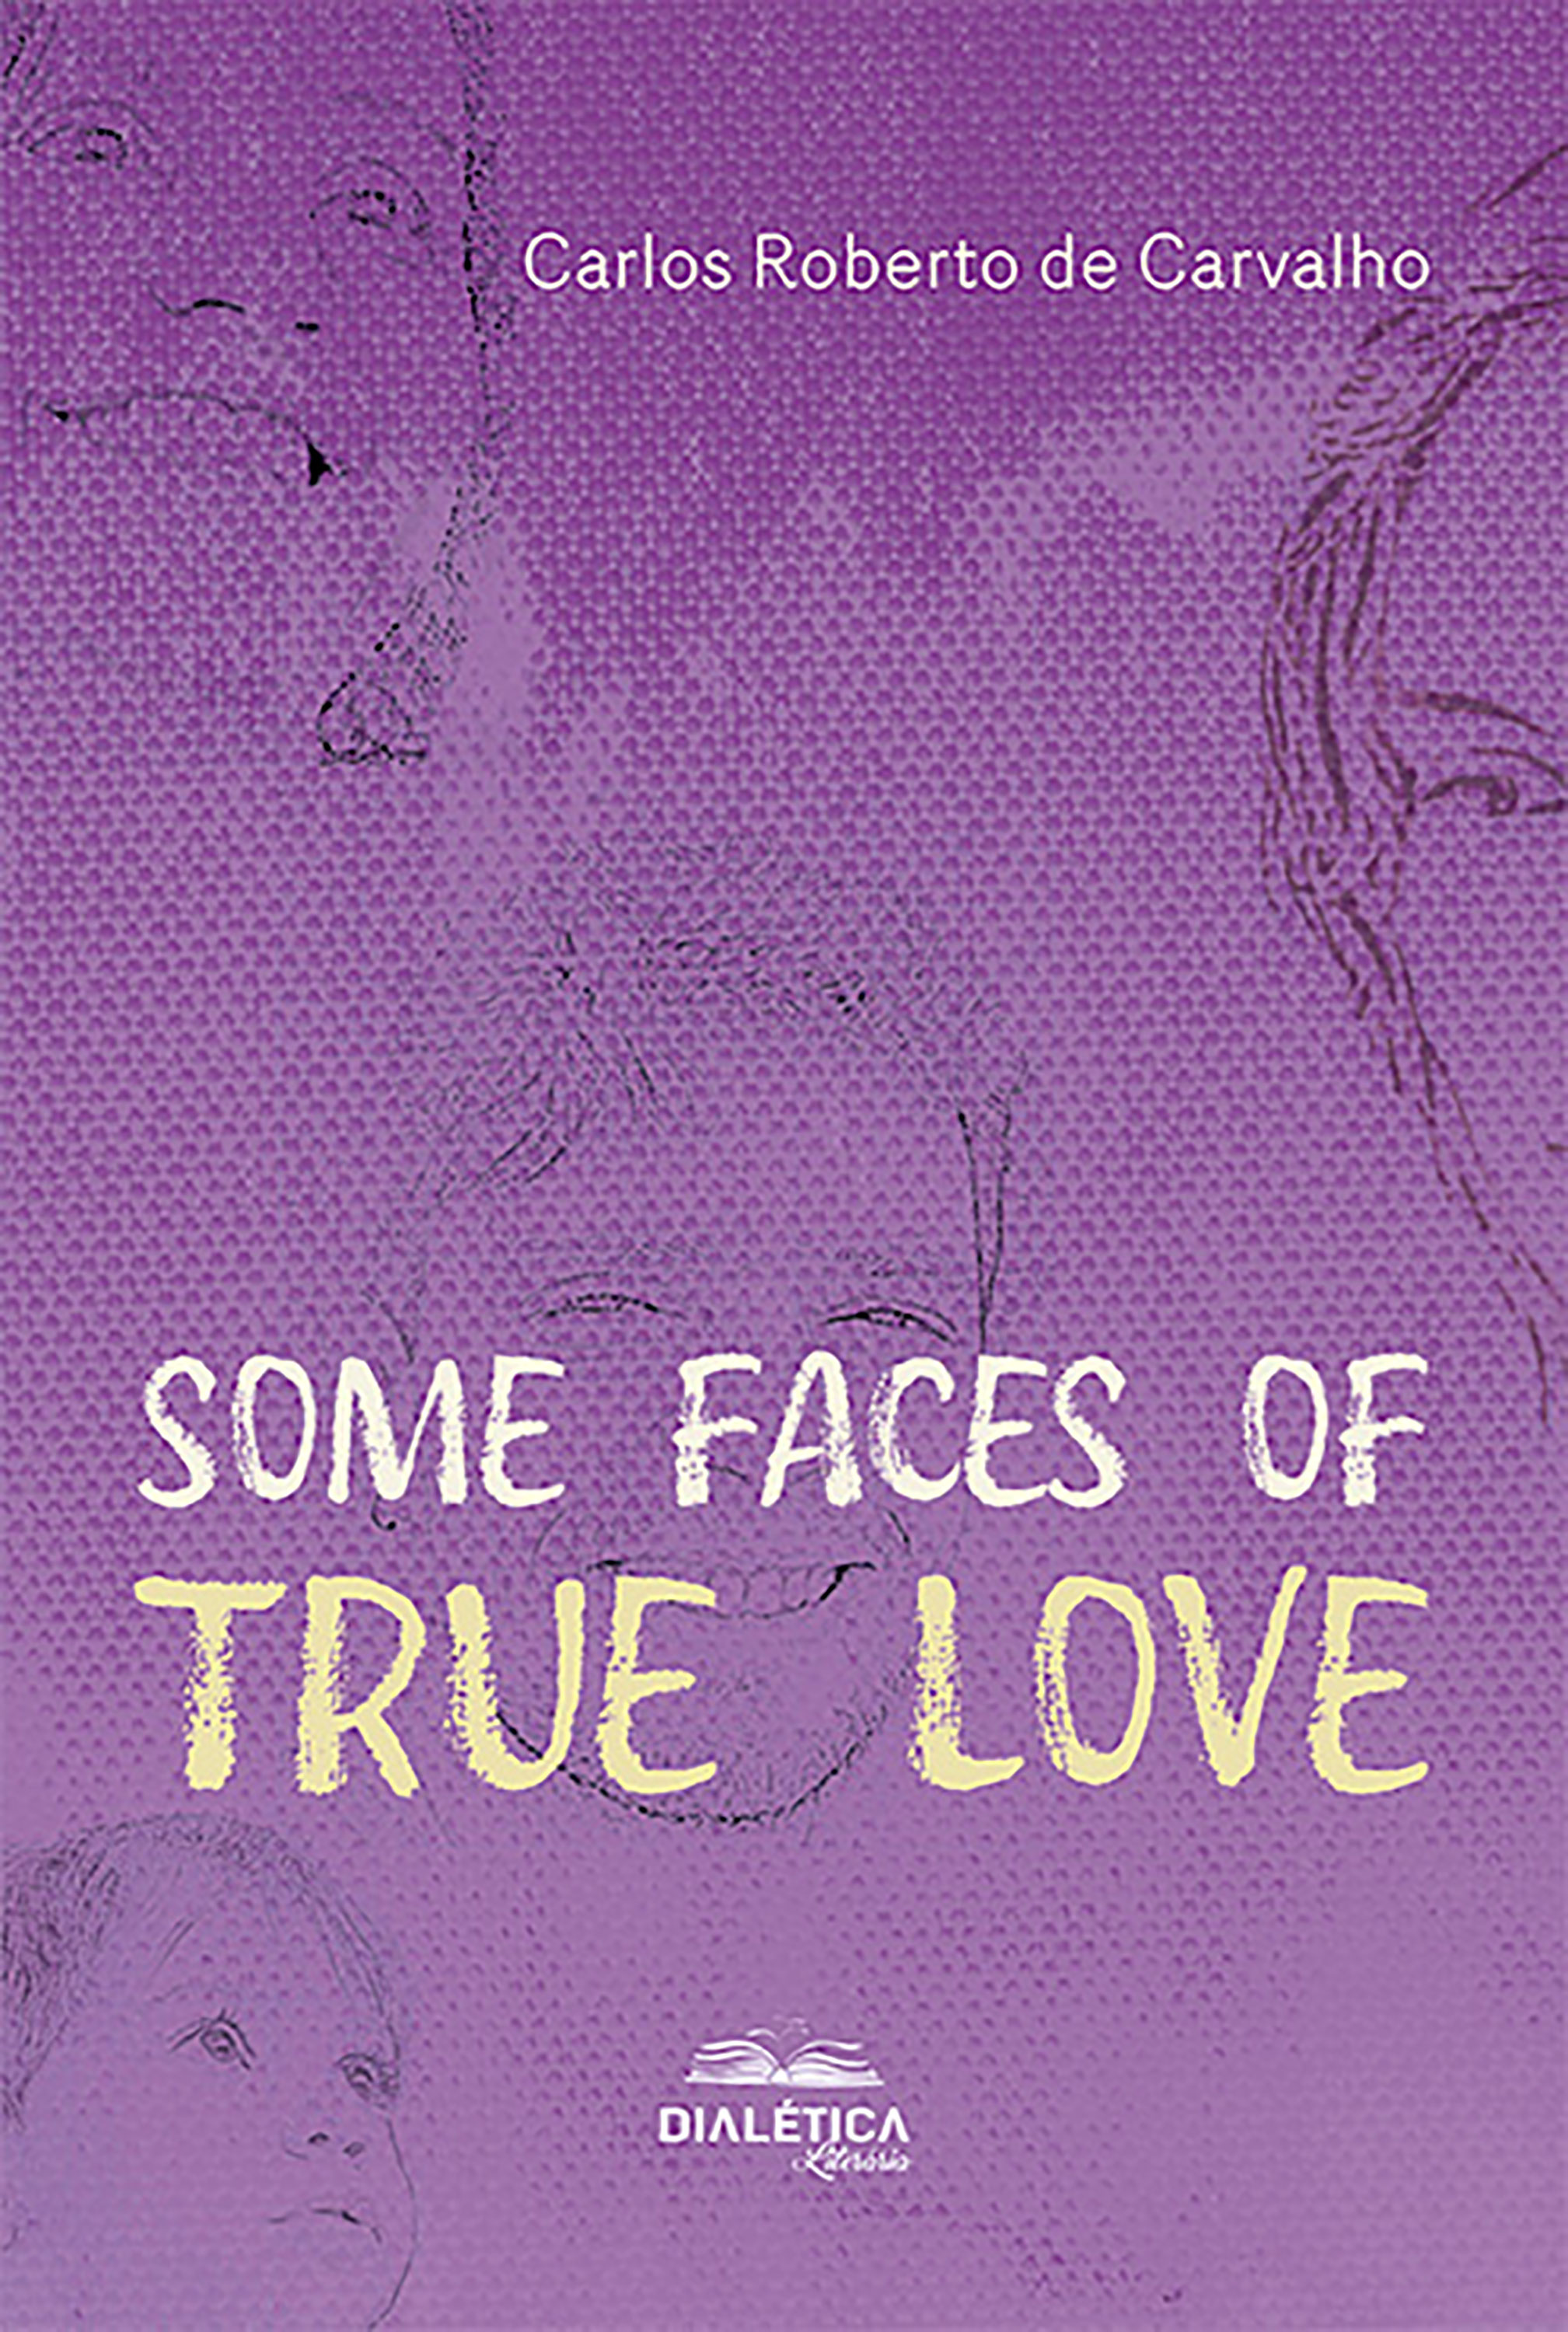 Some Faces of True Love